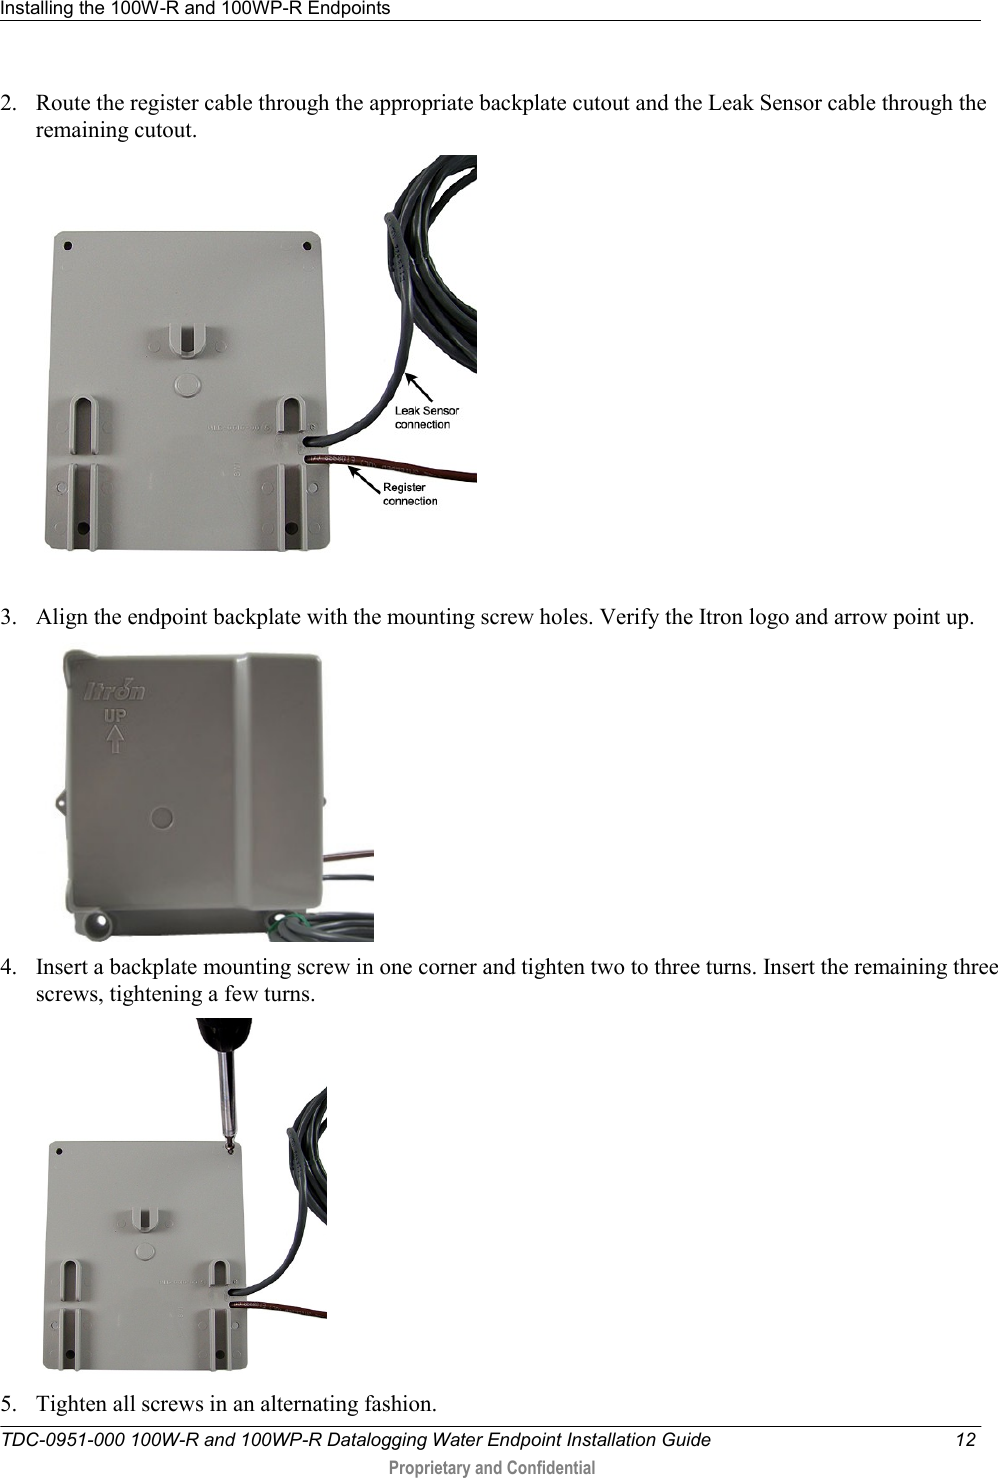 Installing the 100W-R and 100WP-R Endpoints   TDC-0951-000 100W-R and 100WP-R Datalogging Water Endpoint Installation Guide  12  Proprietary and Confidential    2. Route the register cable through the appropriate backplate cutout and the Leak Sensor cable through the remaining cutout.  3. Align the endpoint backplate with the mounting screw holes. Verify the Itron logo and arrow point up.   4. Insert a backplate mounting screw in one corner and tighten two to three turns. Insert the remaining three screws, tightening a few turns.  5. Tighten all screws in an alternating fashion. 